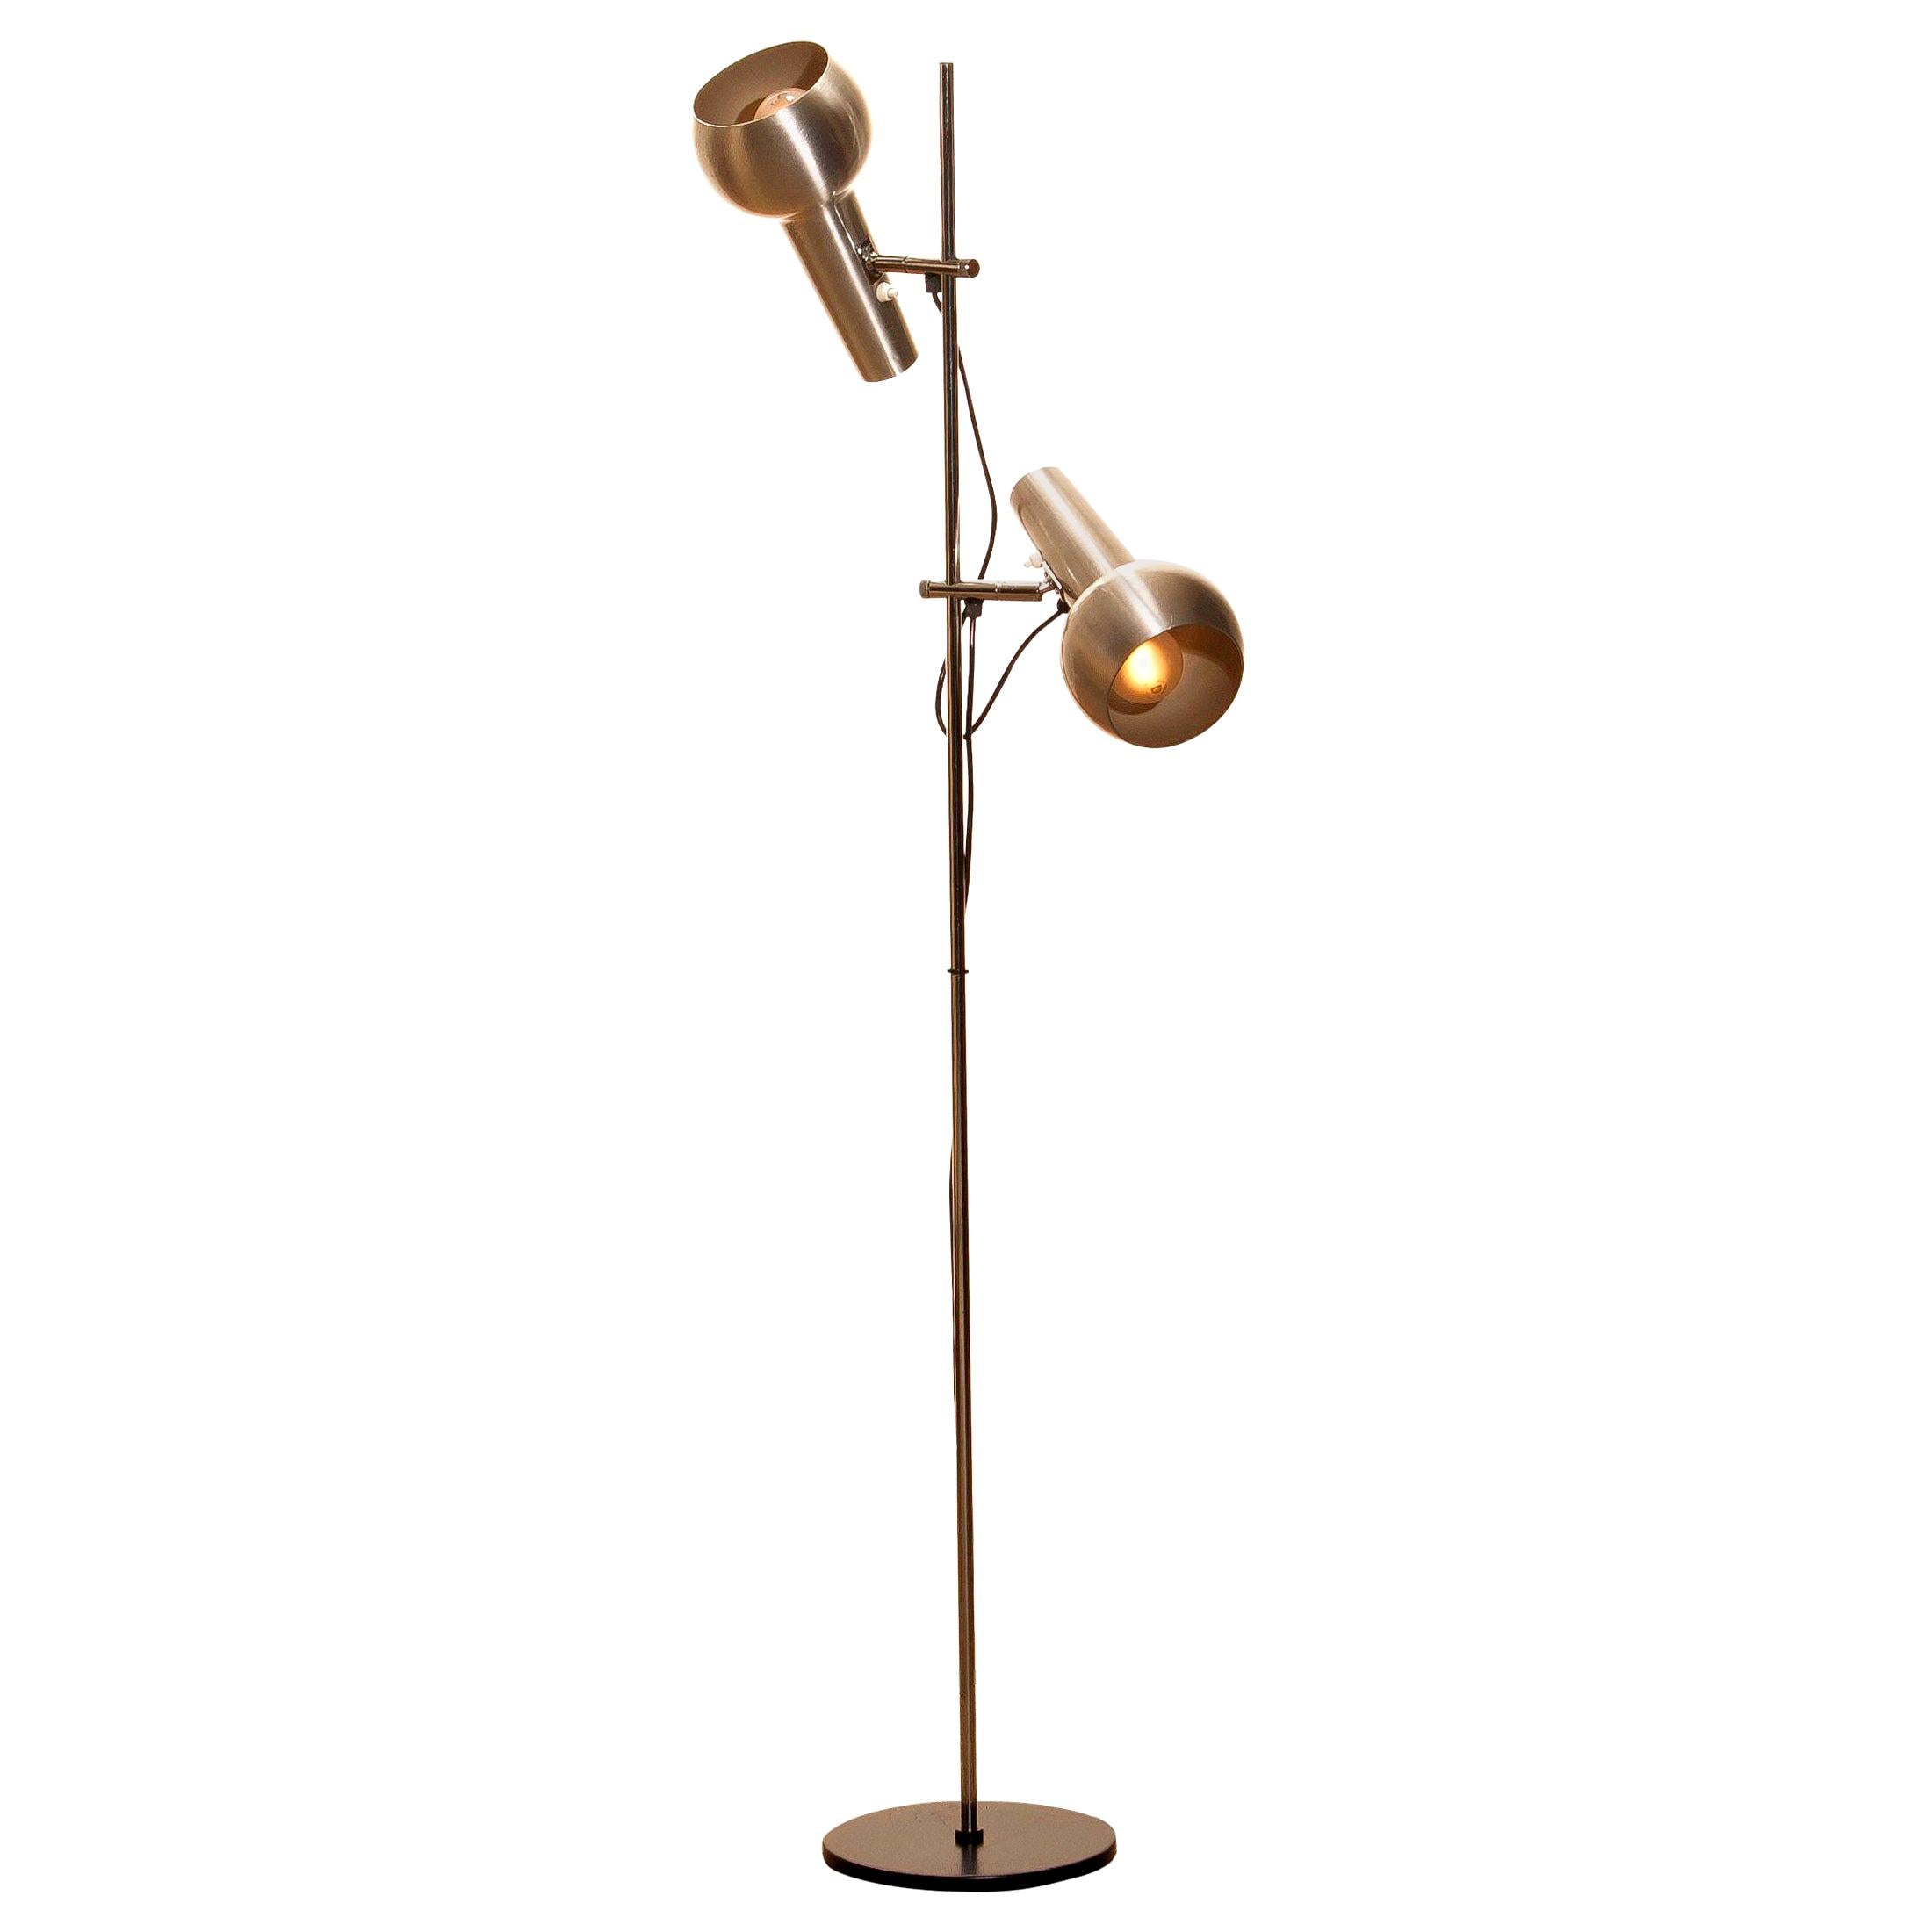 Typical 1970s floor lamp with two big adjustable heads in chrome and aluminum combination and made by Koch & Lowy, 1970s.
In good condition and technical 100%.
Both lamps or shades are with a switch provided.
Period: 1970s.
The dimensions are